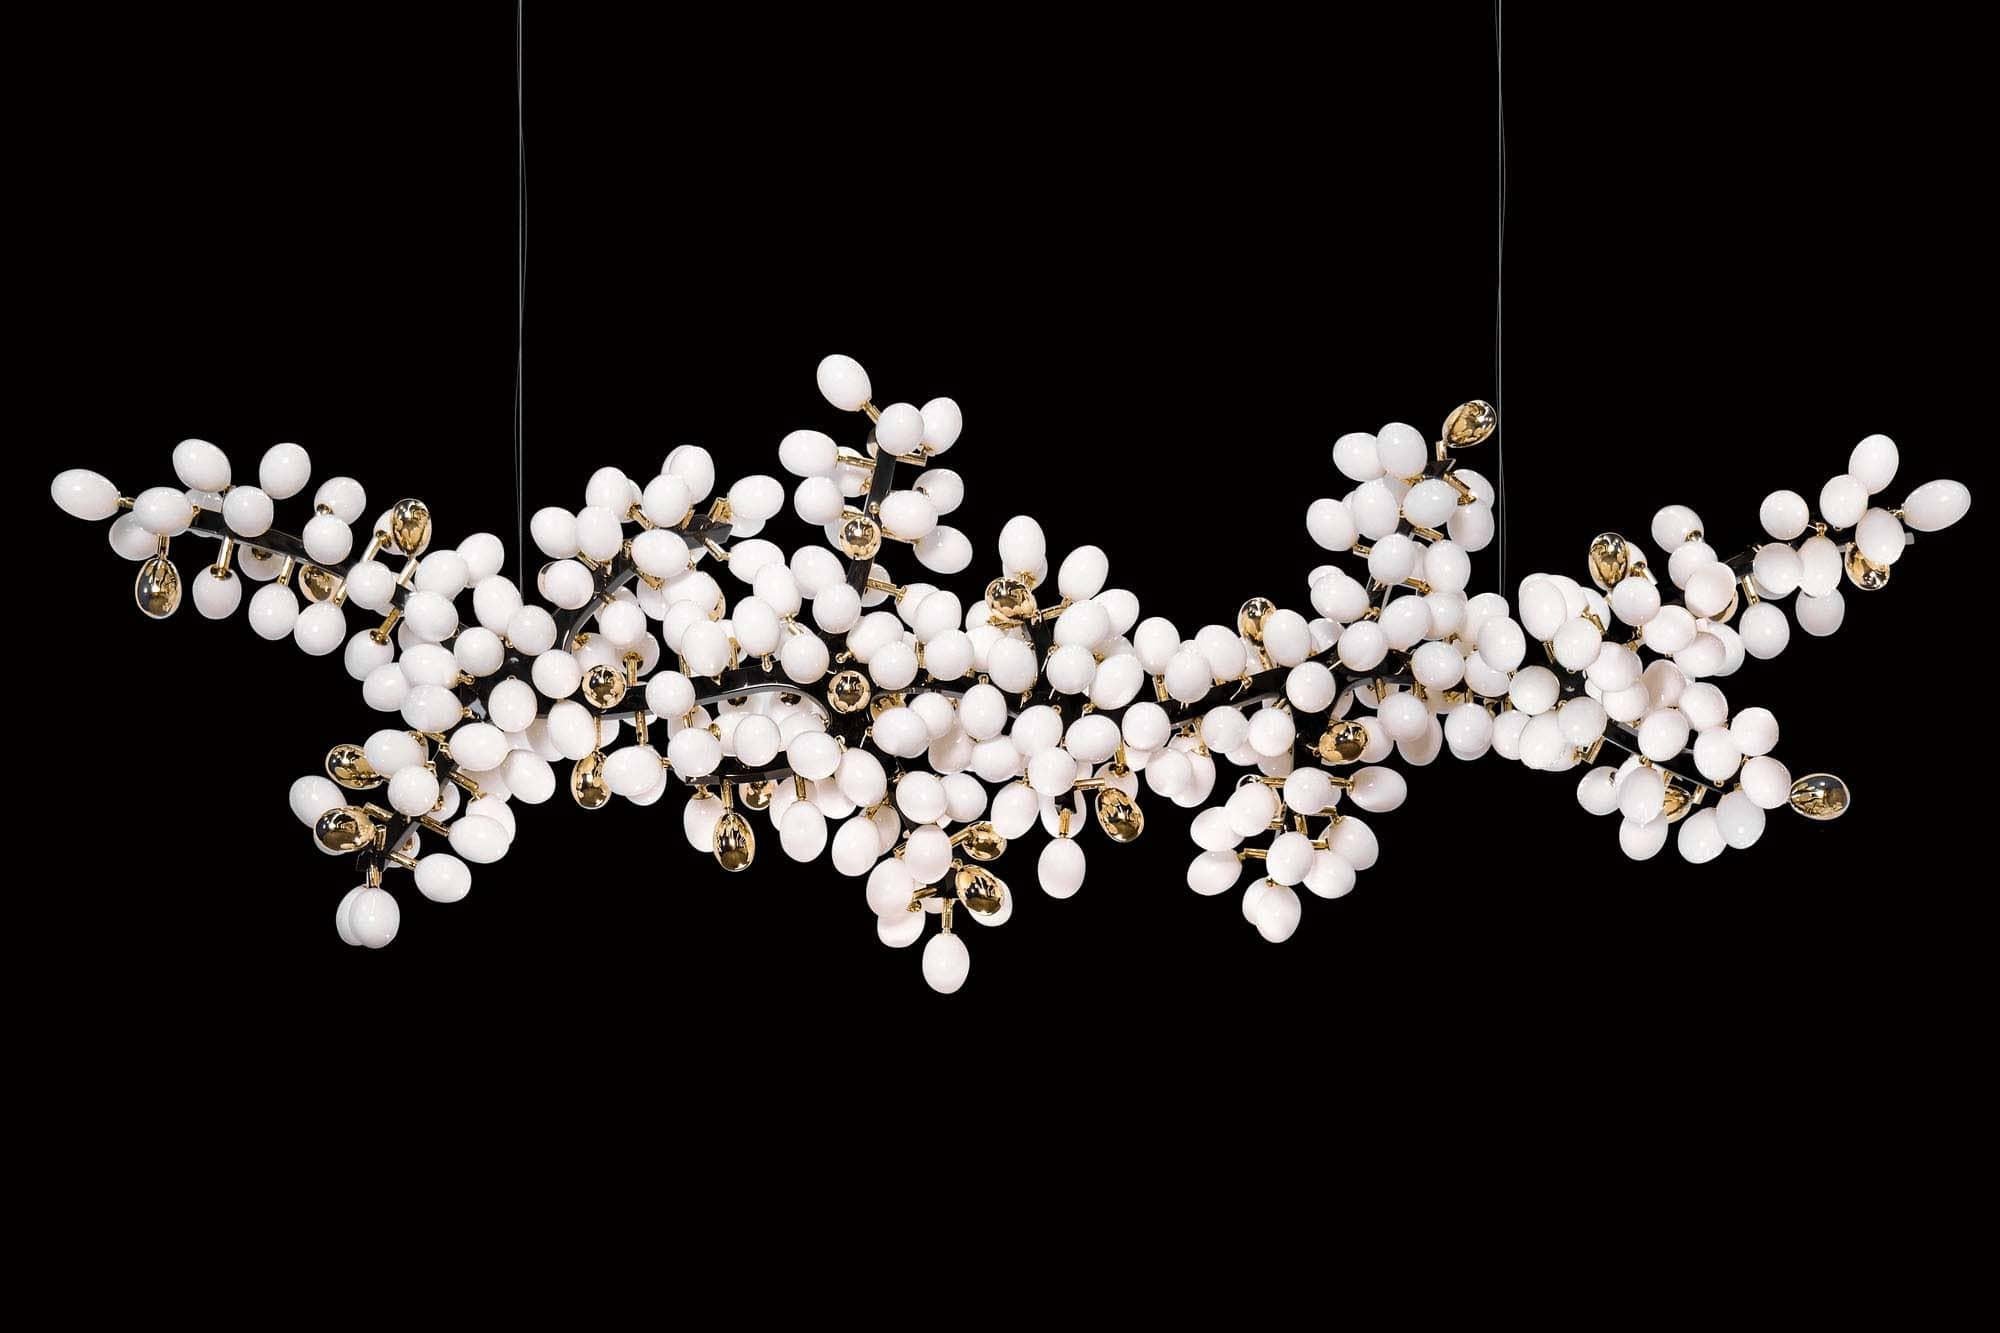 The spectacular Valiant Chandelier by Barlas Baylar is inspired by the resplendent natural forms of ancient flora. The Valiant Collection is rigorously crafted in hand-blown Murano glass and solid sculpted bronze (or stainless steel.)